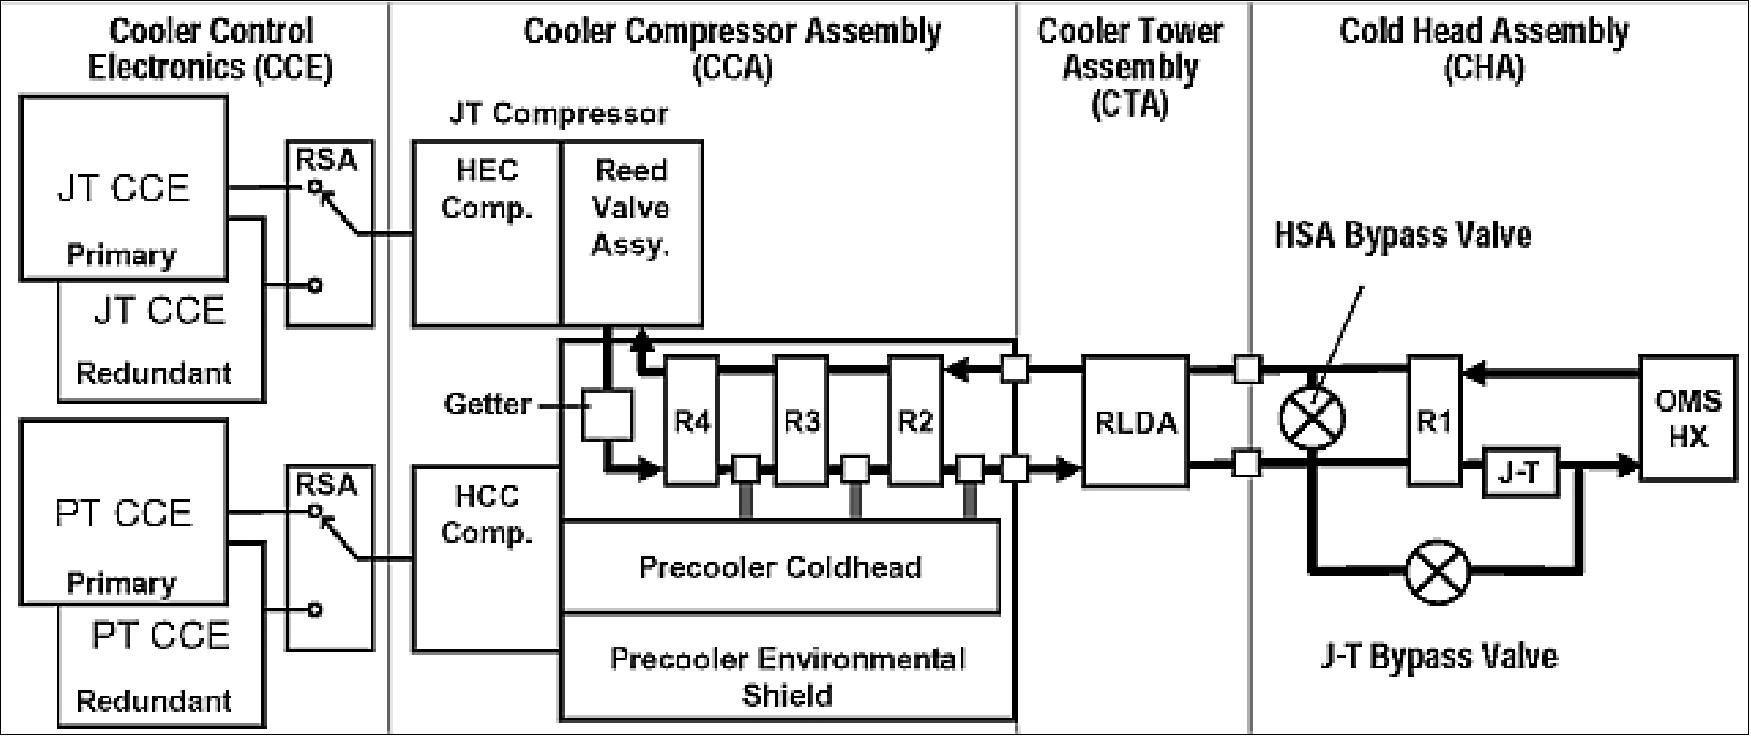 Figure 85: Block diagram of the ACTDP design applied to the MIRI cooler subsystem; the dark lines show the He gas flow in the JT cooler loop (image credit: NGAS)